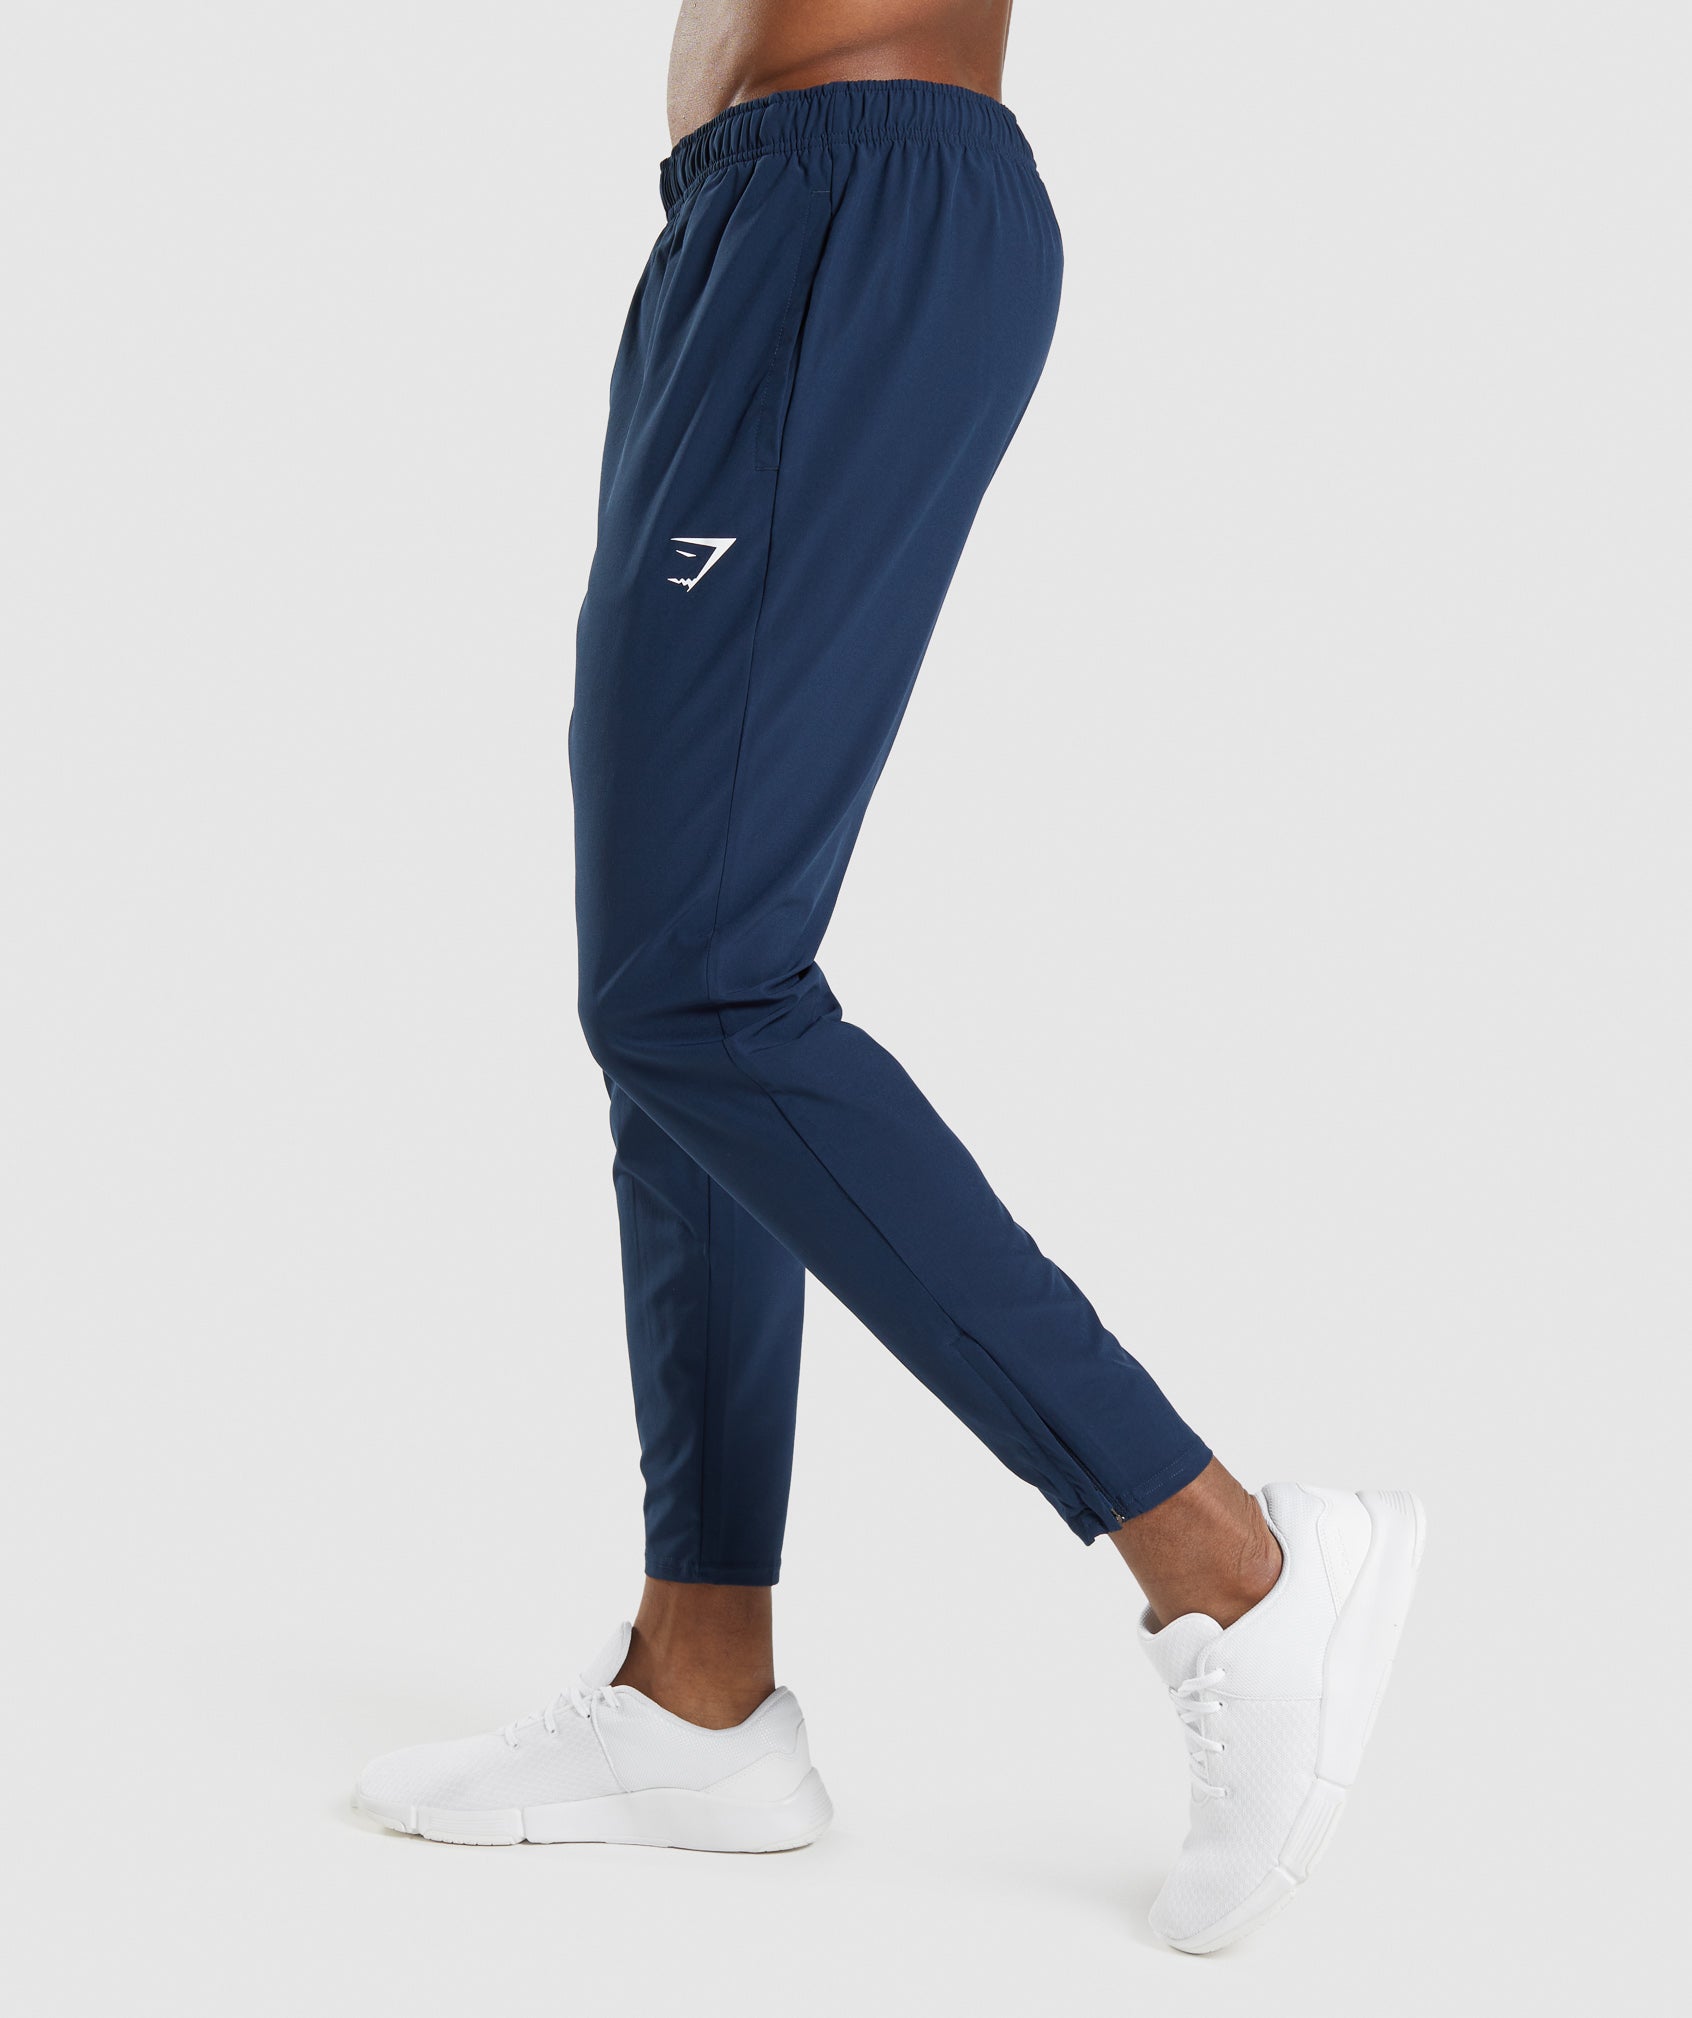 Arrival Woven Joggers in Navy